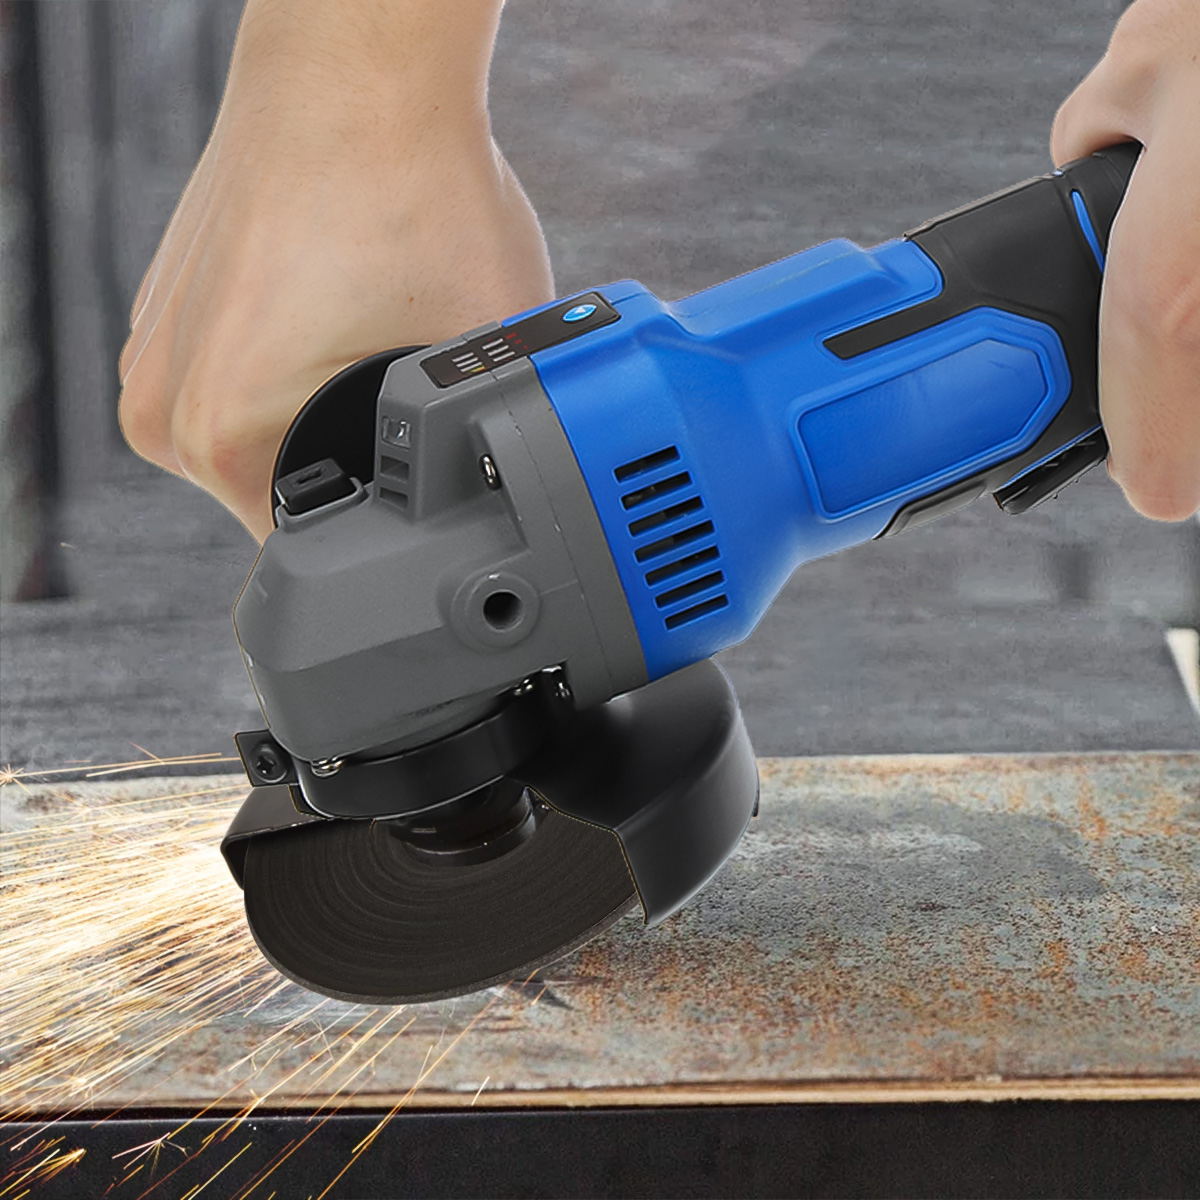 588VF-Cordless-Brushless-100mm-1580W-Electric-Angle-Grinder-3-Gears-Adjustable-Grinding-Machine-Poli-1941456-12